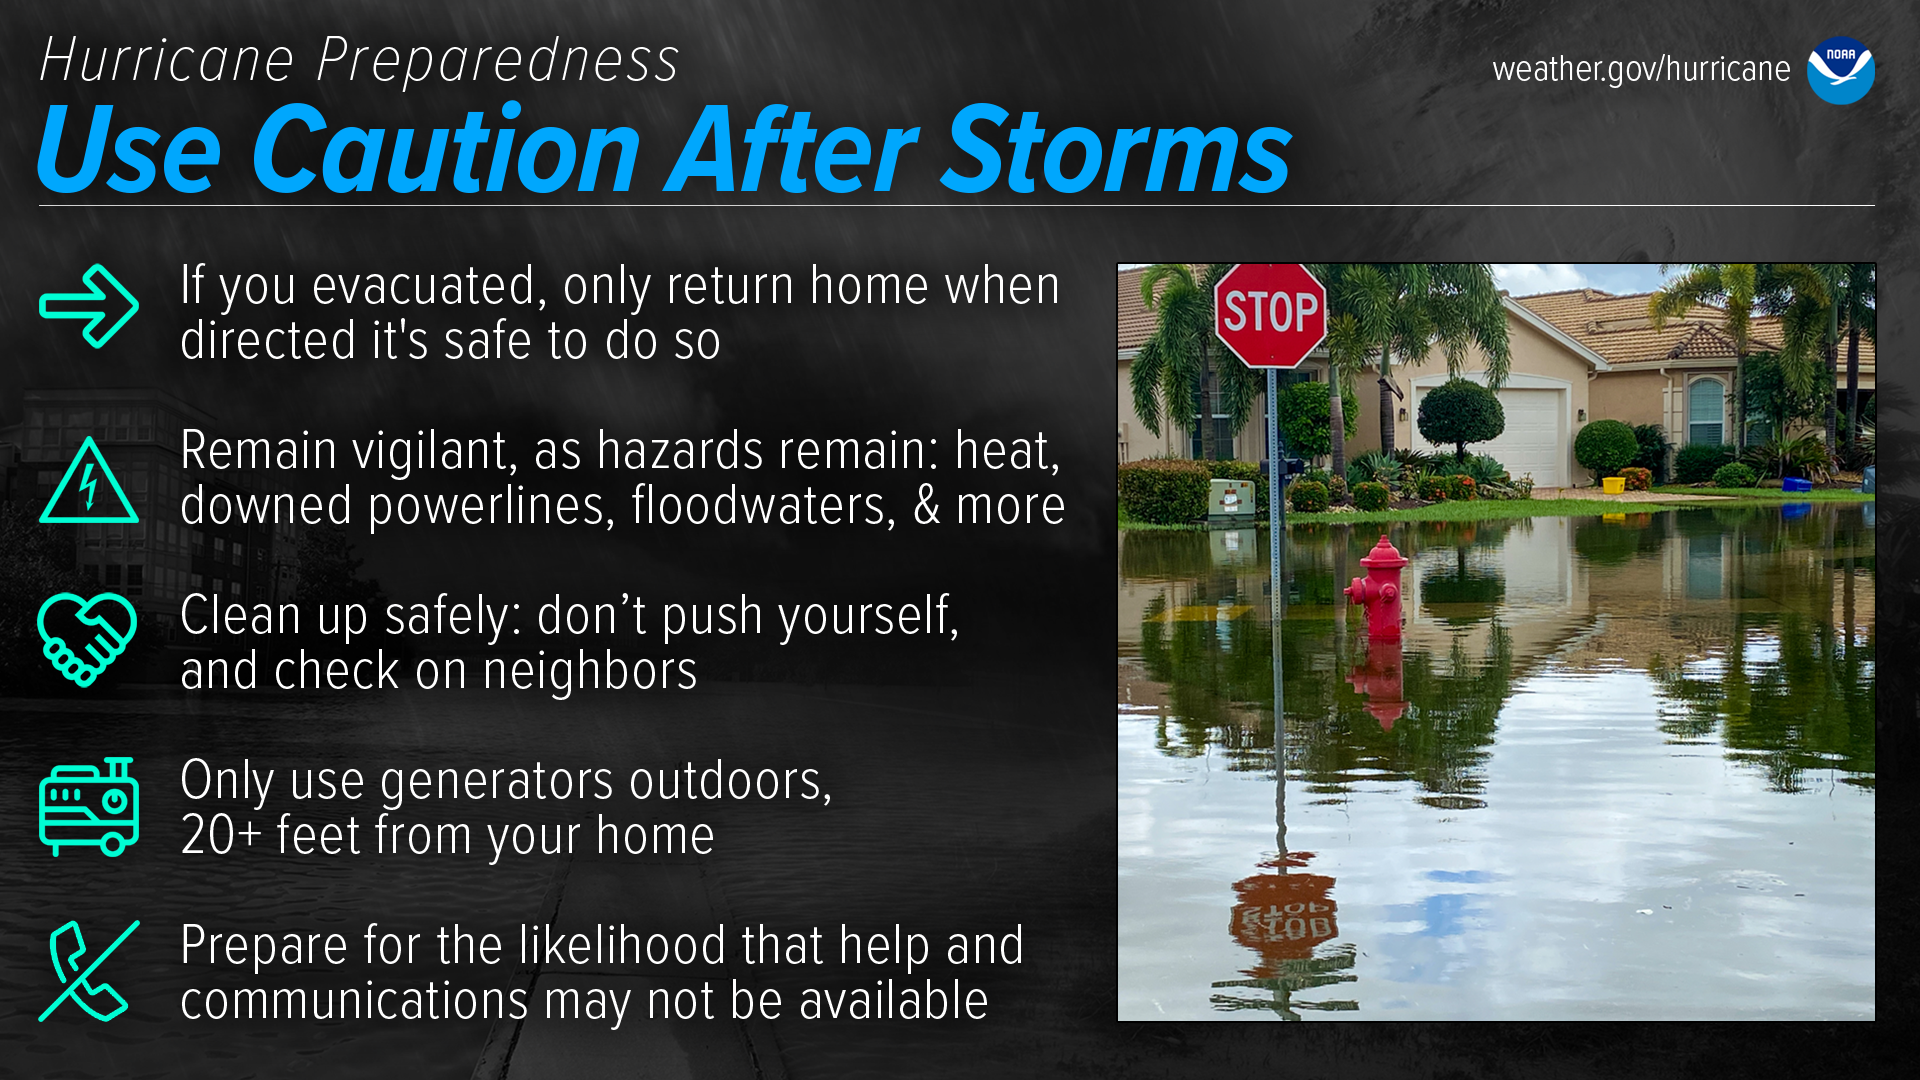 Hurricane Preparedness - Use Caution After Storms. If you evacuated, only return home when directed that its safe to do so. Remain vigilant, as hazards remain: heat, downed power lines, floodwaters, and more. Clean up safely: don't push yourself, and check on neighbors. Only use generators outdoors, 20+ feet from your home. Prepare for the likelihood that help and communications may not be available.